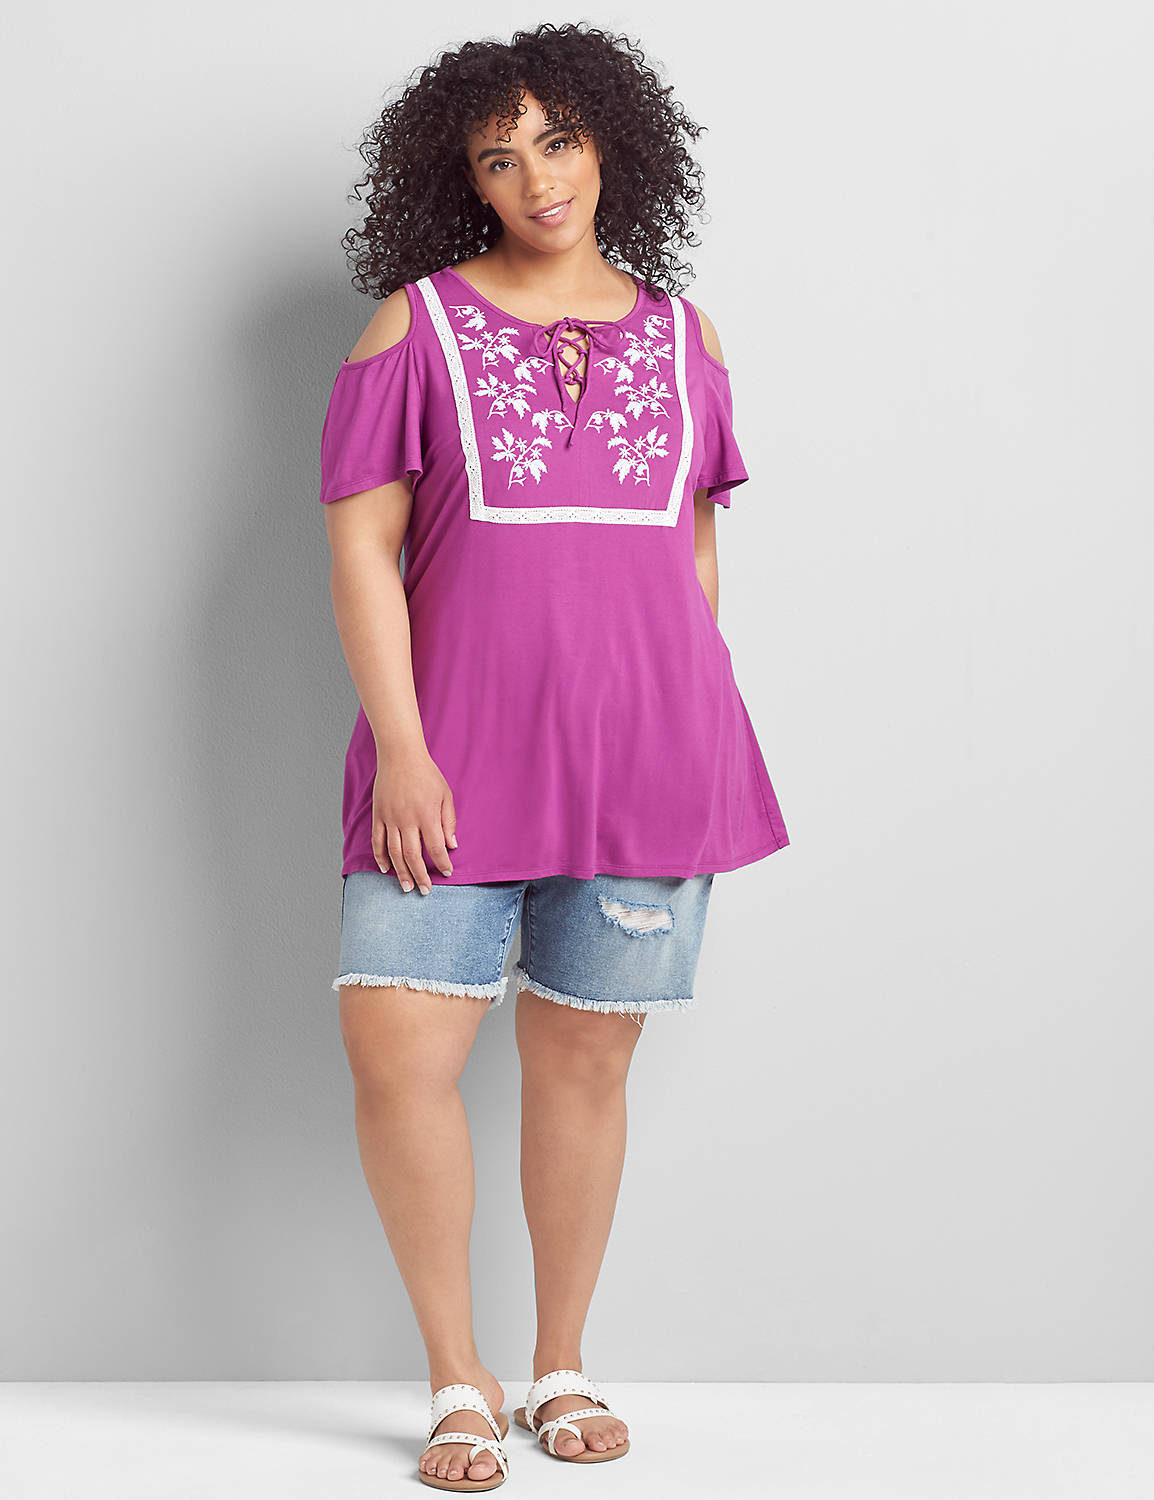 Short Flutter Sleeve Crew Neck Swing Tee With Embroidery And Lace Up 1120775:Romantic Rose 61-0004-14:14/16 Product Image 3